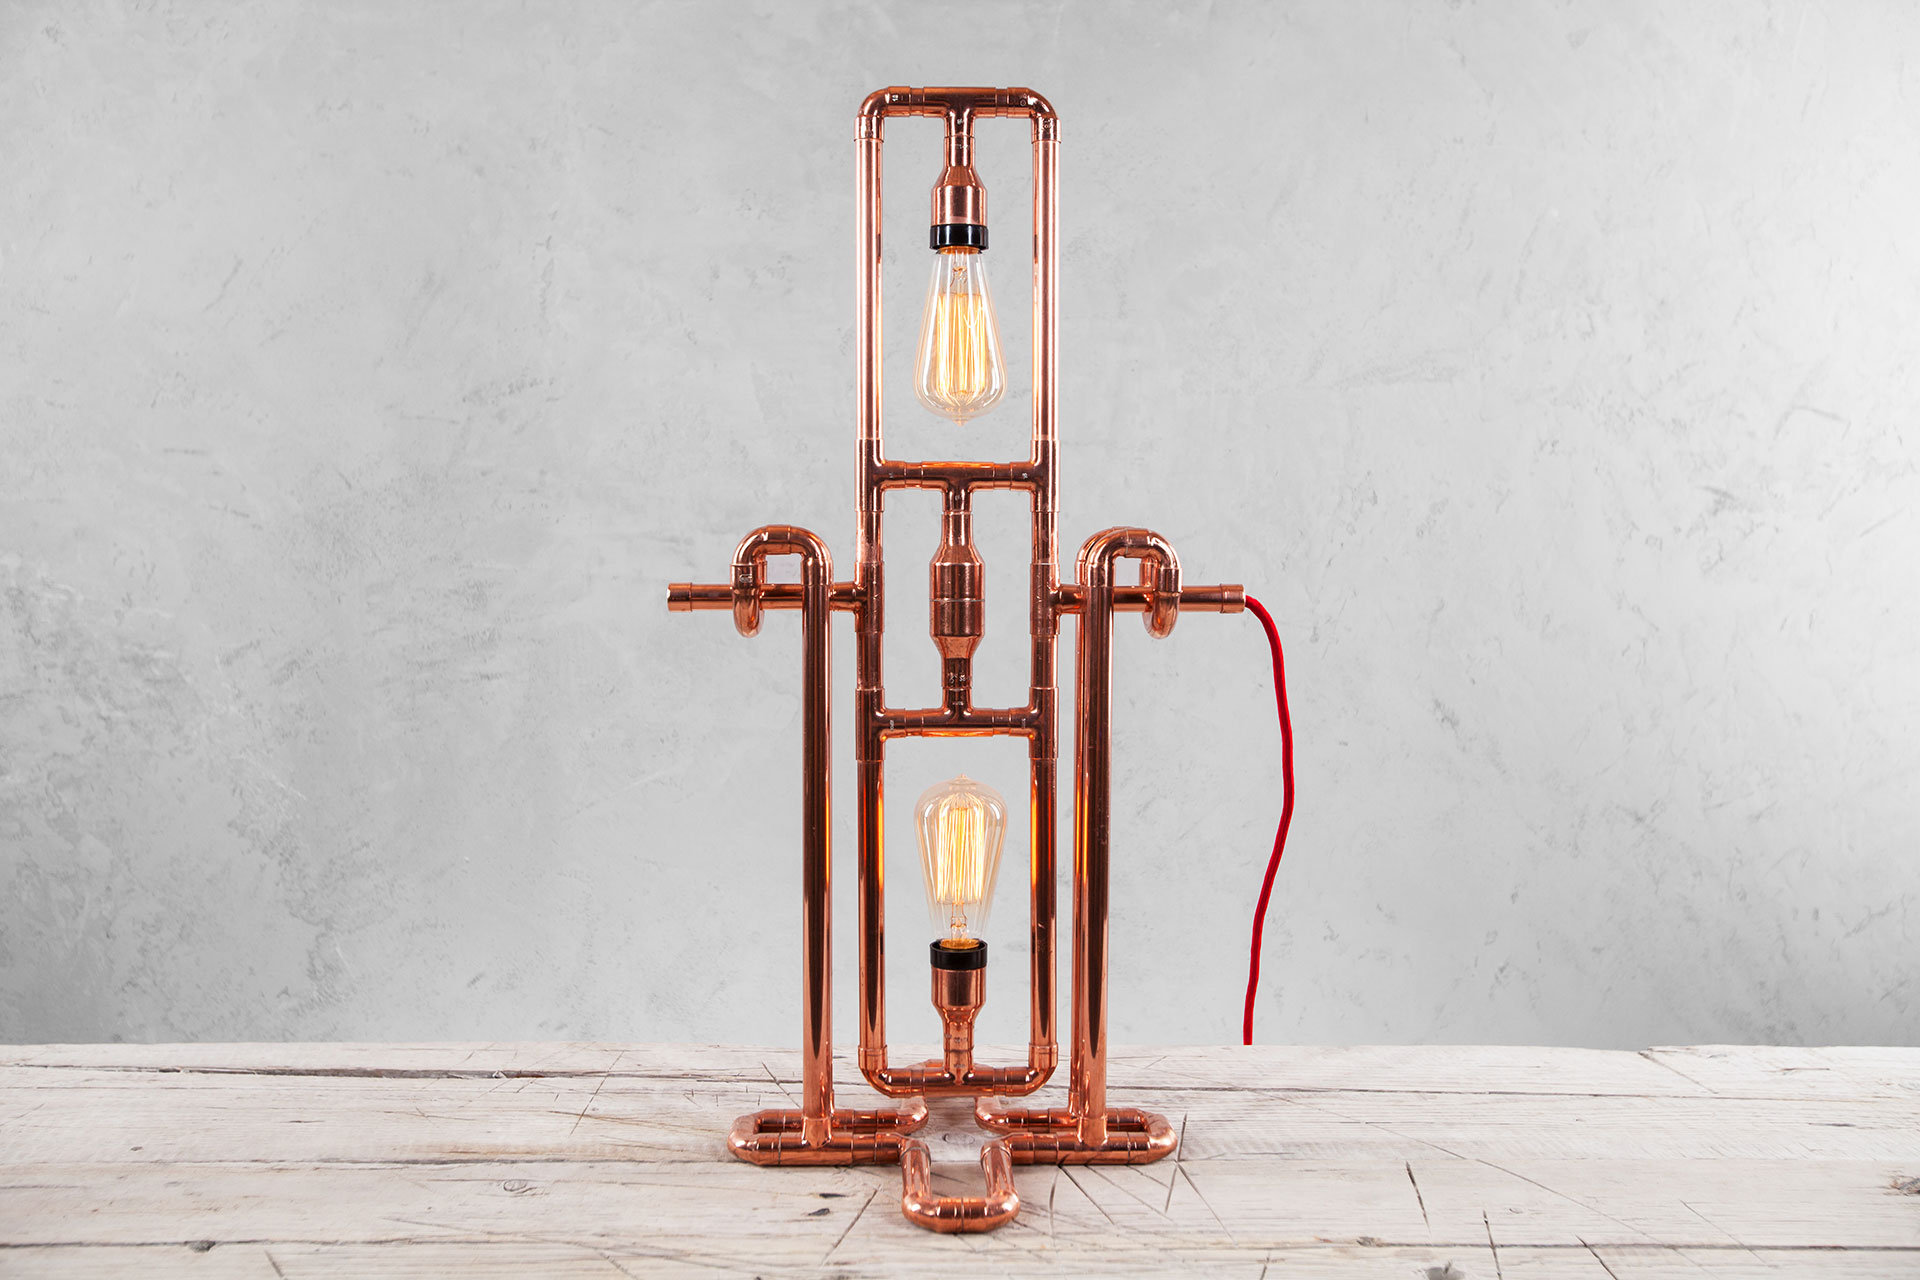 Unique rotating table lamp in trendy copper or gold brass inspired by steampunk design